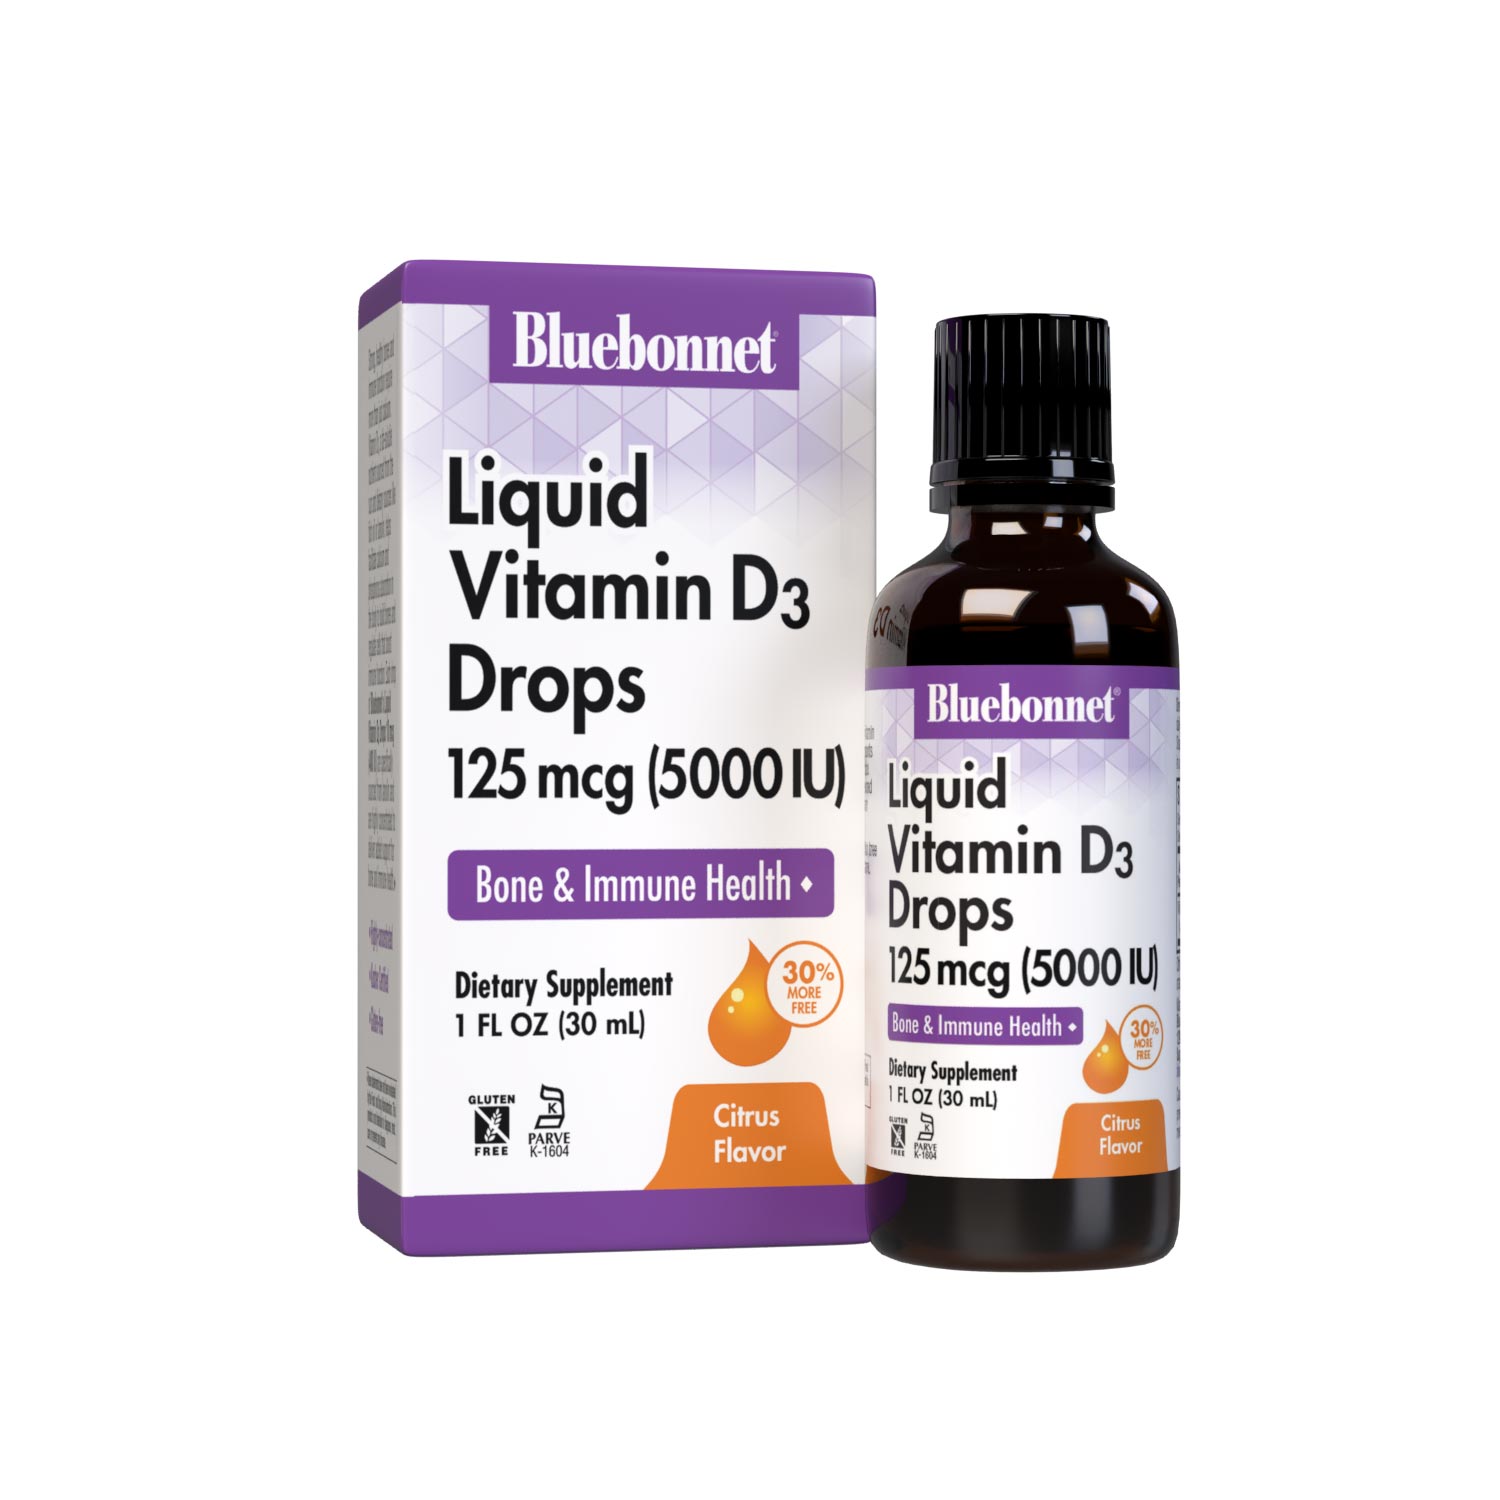 Bluebonnet’s Liquid Vitamin D3 Drops 5000 IU (125 mcg) are formulated with vitamin D3 (cholecalciferol) from lanolin for strong healthy bones. Each drop of this sunshine vitamin is flavored using a hint of orange and lemon essential oils. Bottle with box. #size_1 fl oz